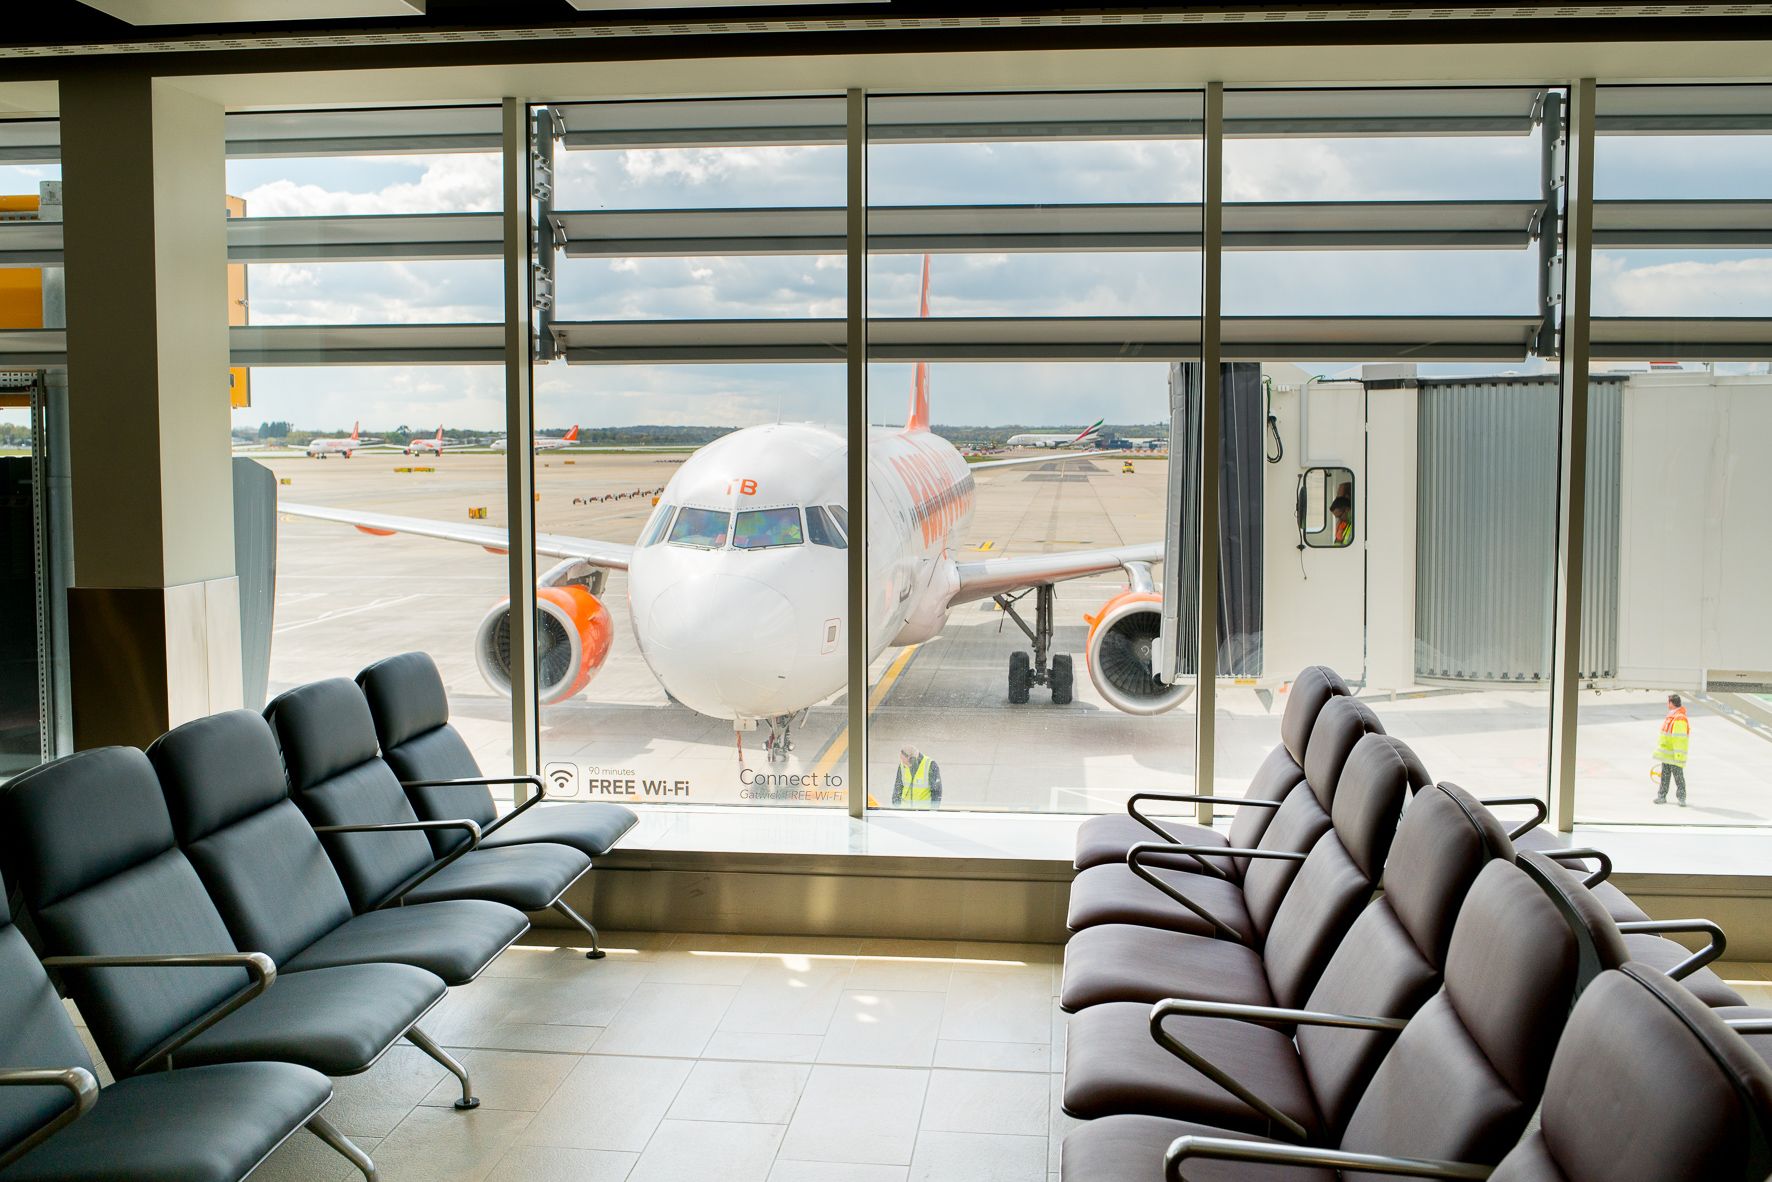 A view of an easyJet aircraft from inside Gatwick Airport. 